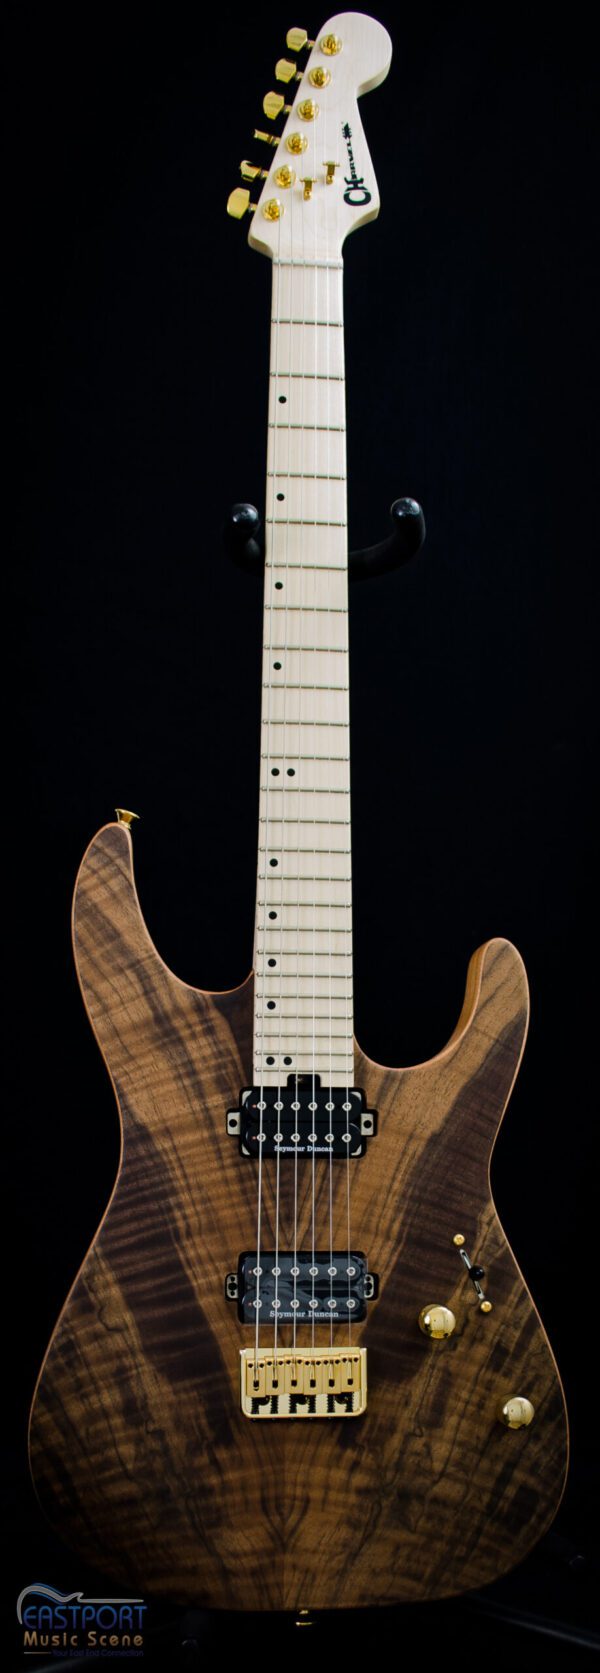 A guitar with a wooden body and white strings.